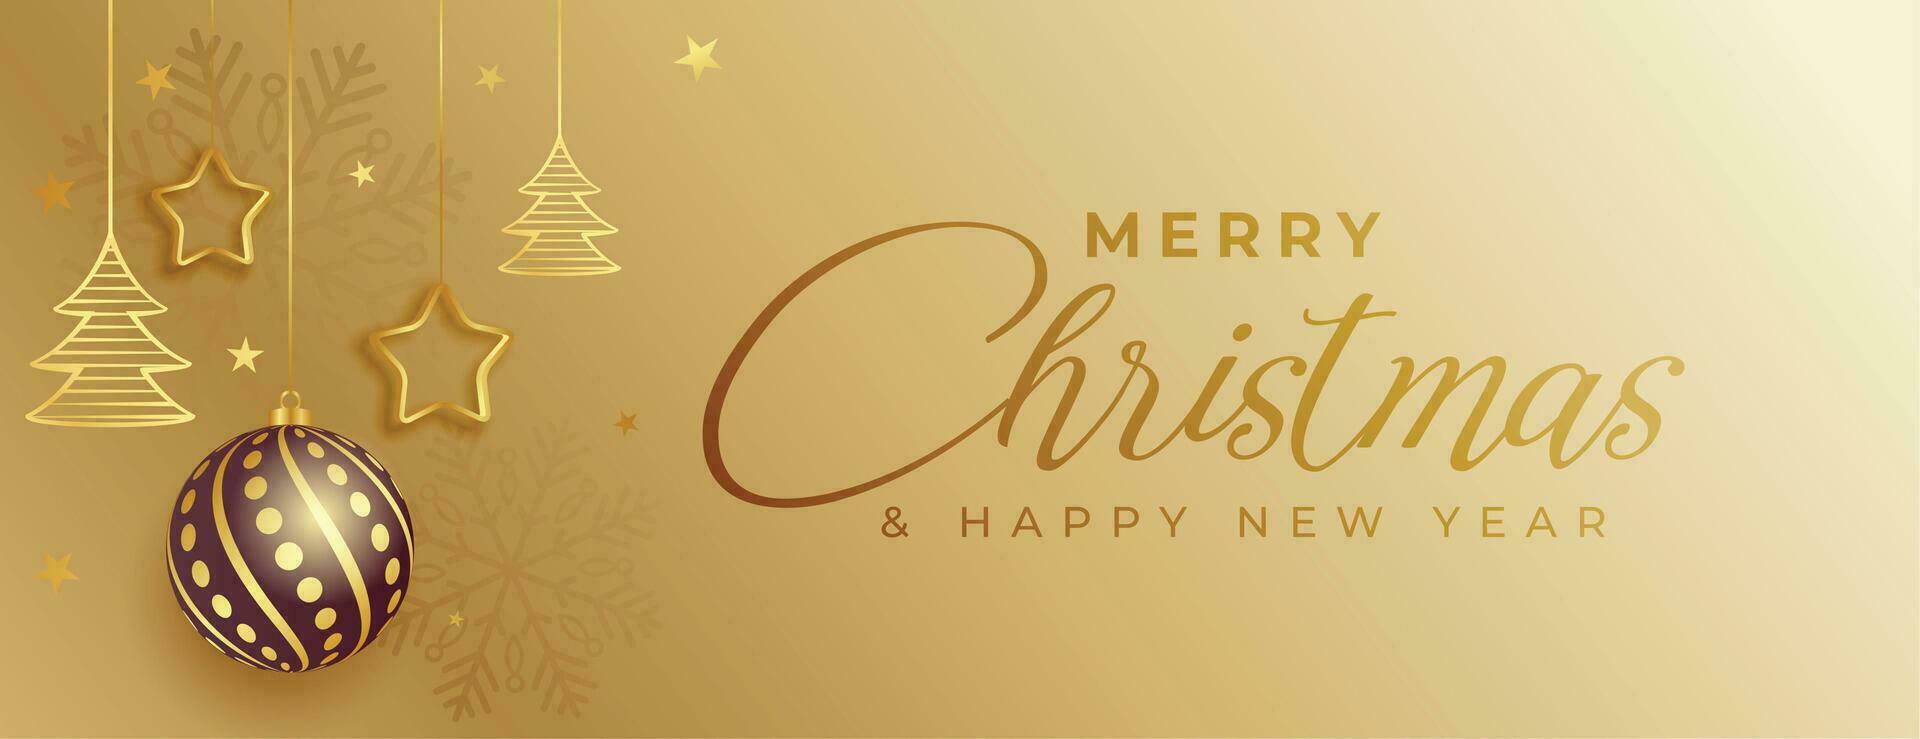 beautiful merry christmas golden banner with hanging decorative elements vector